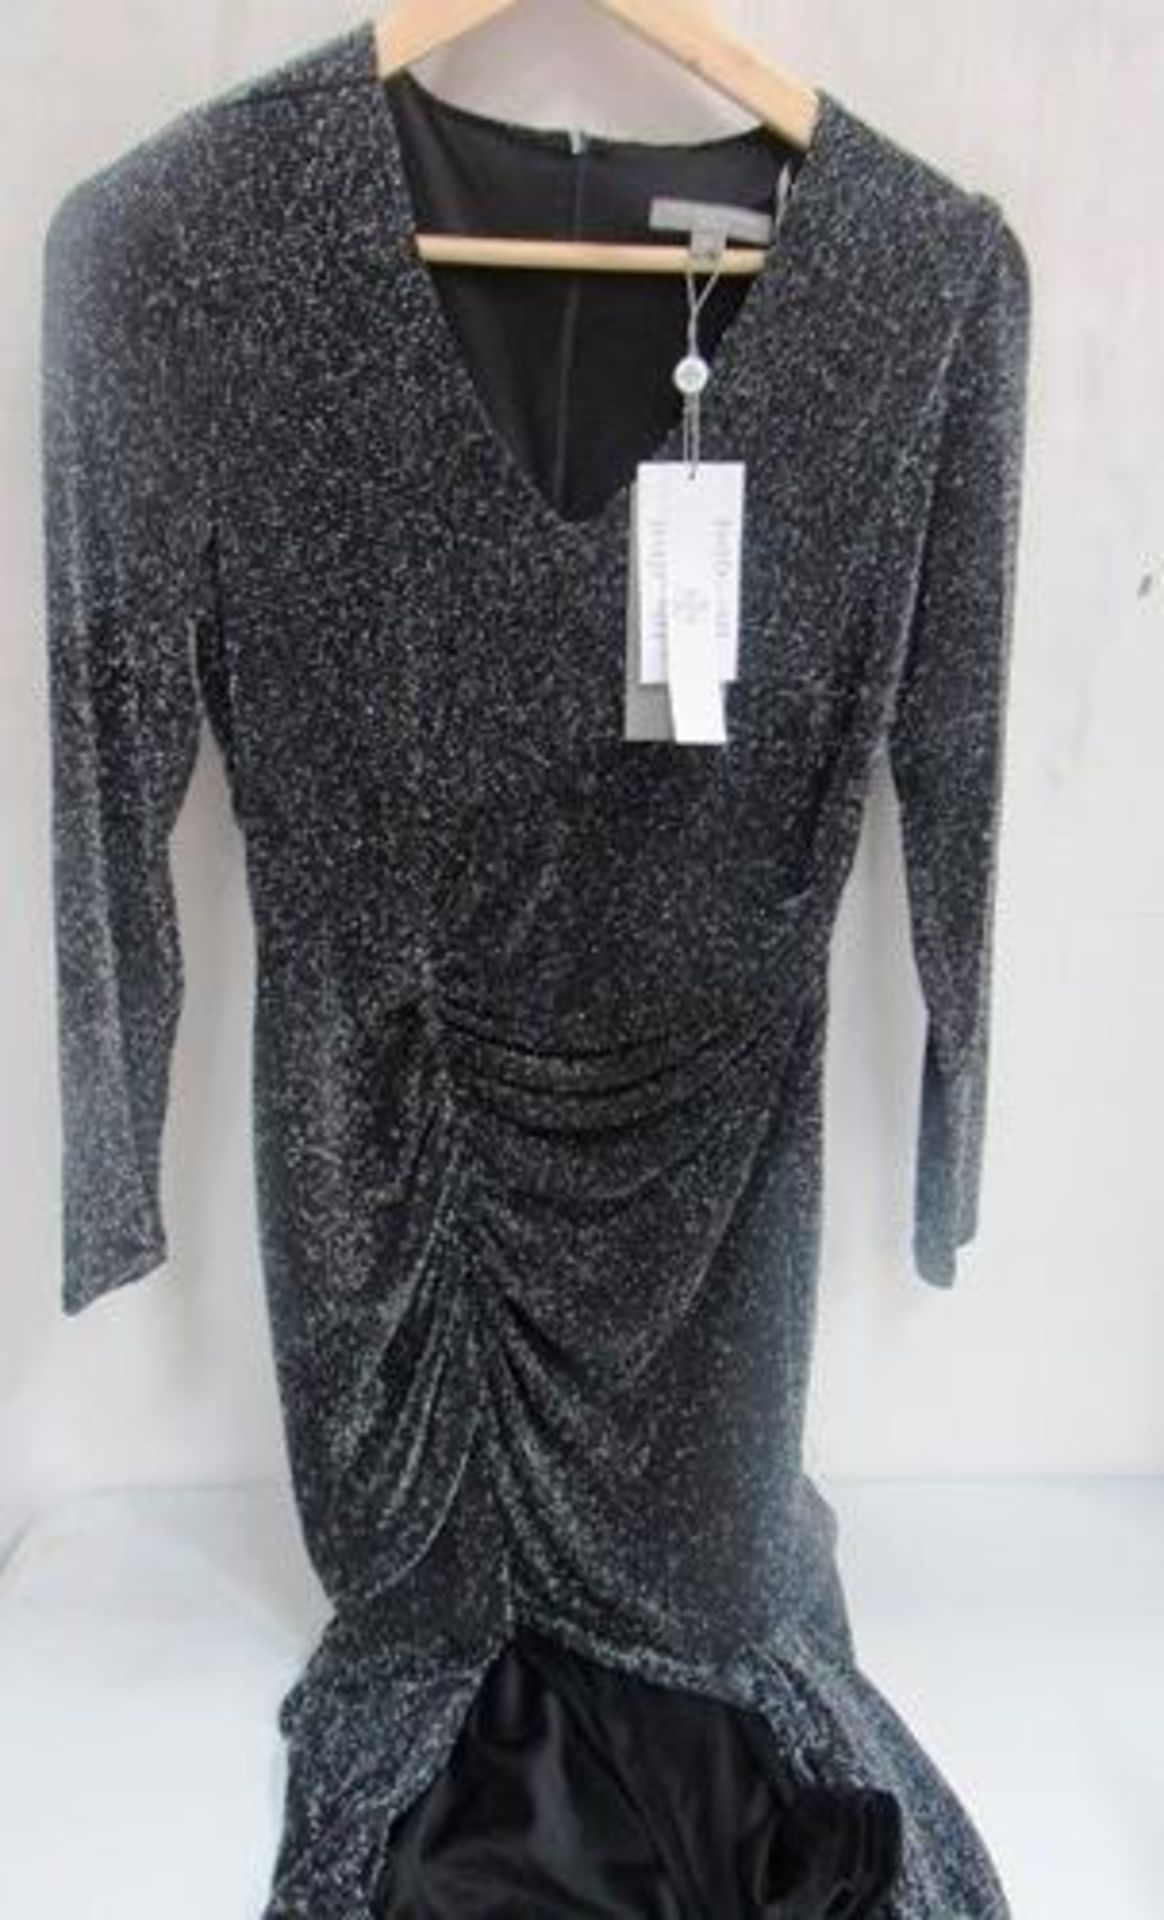 1 x Fenn Wright Manson Fabienne maxi party frock, size 12, RRP £199.00 - New with tags (1A)